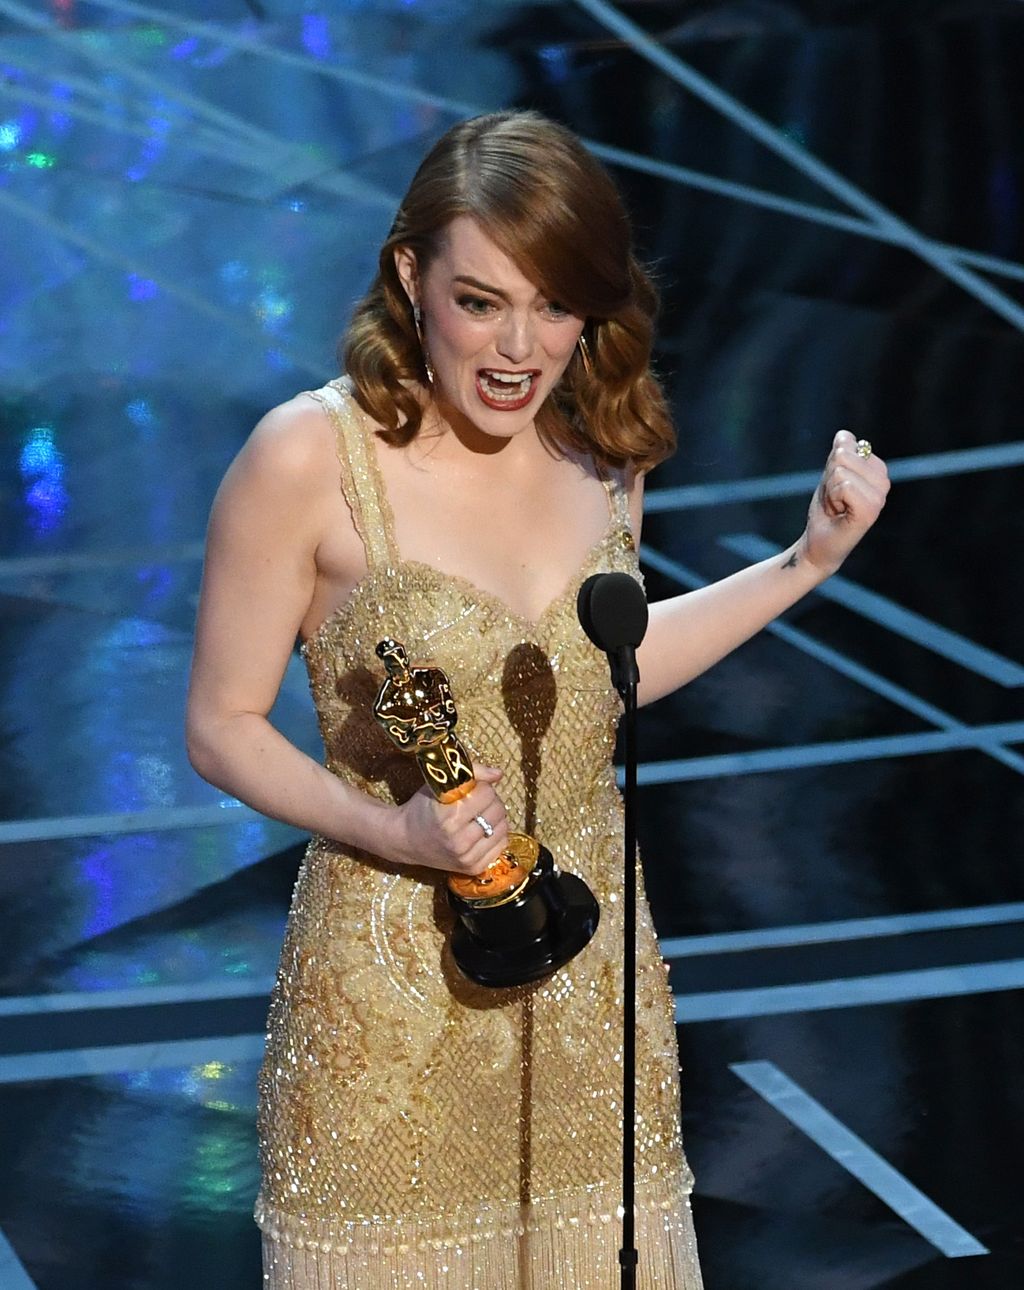 HOLLYWOOD, CA - FEBRUARY 26:  Actress Emma Stone accepts Best Actress for 'La La Land' onstage during the 89th Annual Academy Awards at Hollywood & Highland Center on February 26, 2017 in Hollywood, California.  (Photo by Kevin Winter/Getty Images)